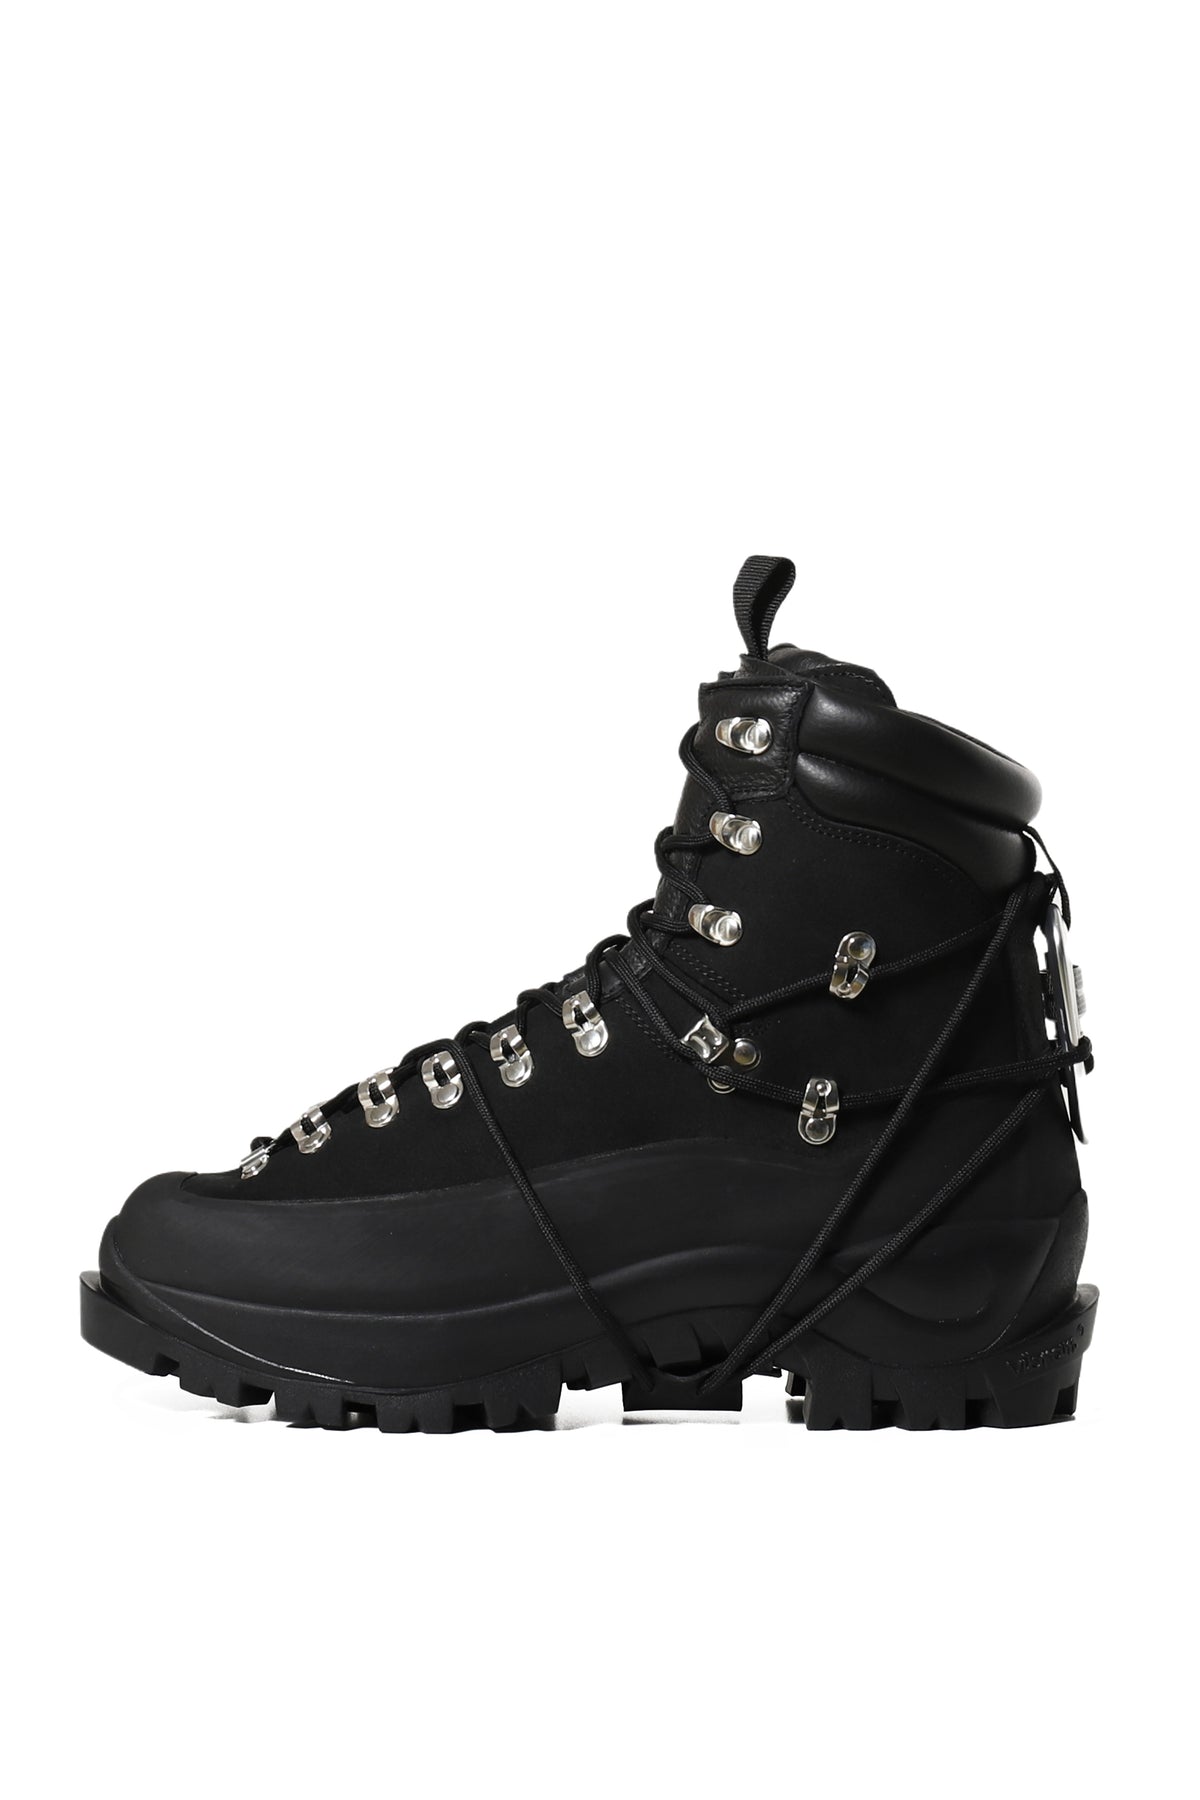 HIKING BOOTS / BLK